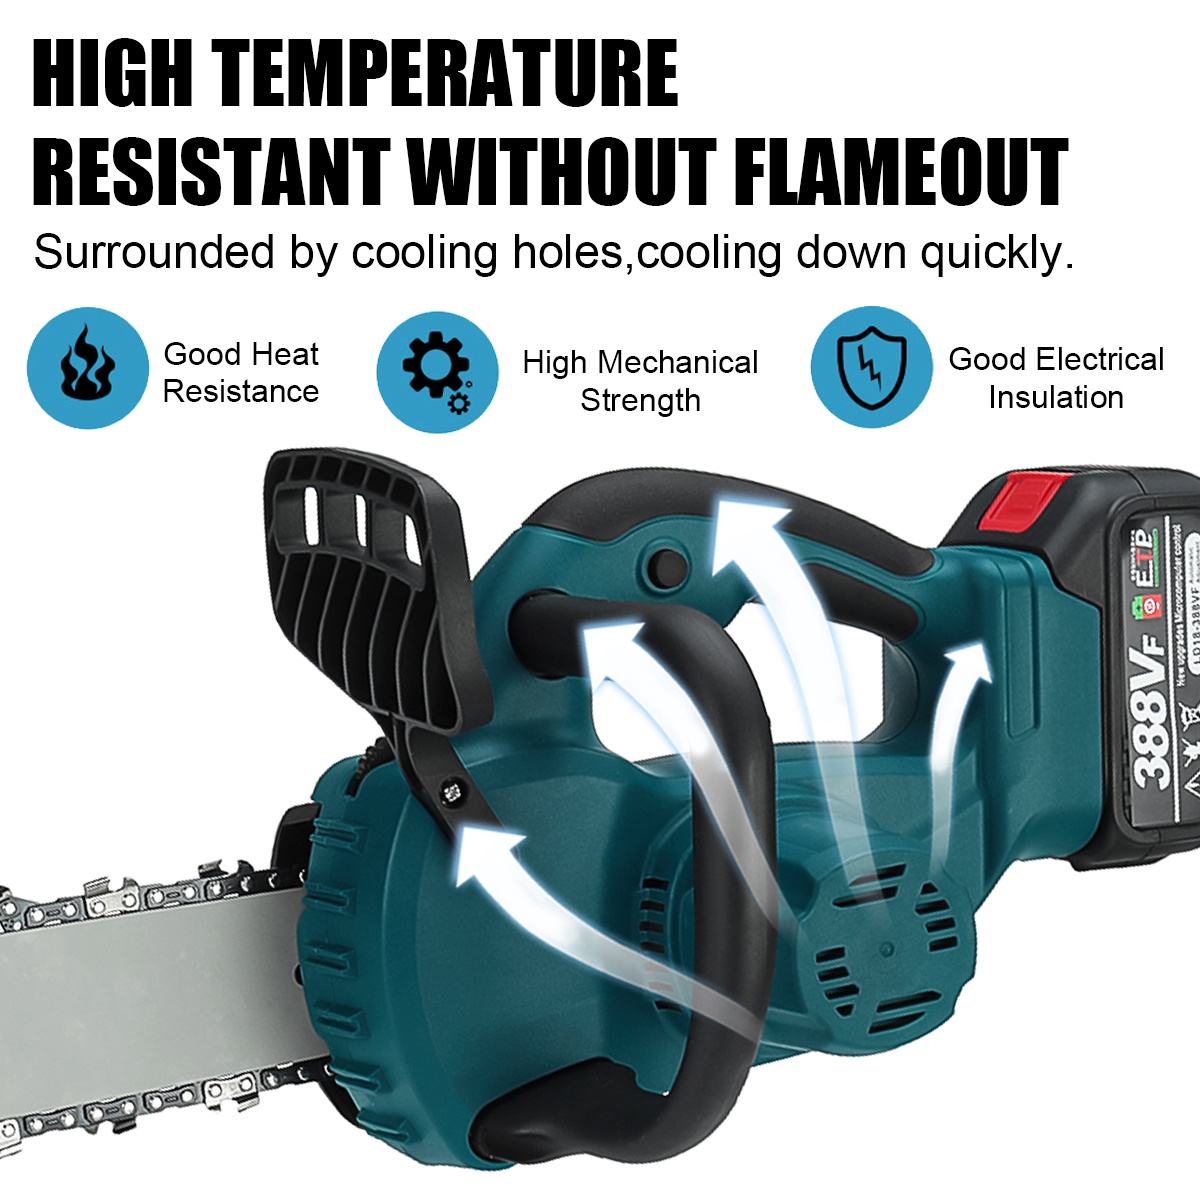 388VF-5000W-10-Inch-Portable-Electric-Chain-Saw-Pruning-Chain-Saw-Rechargeable-Woodworking-Power-Too-1919274-4